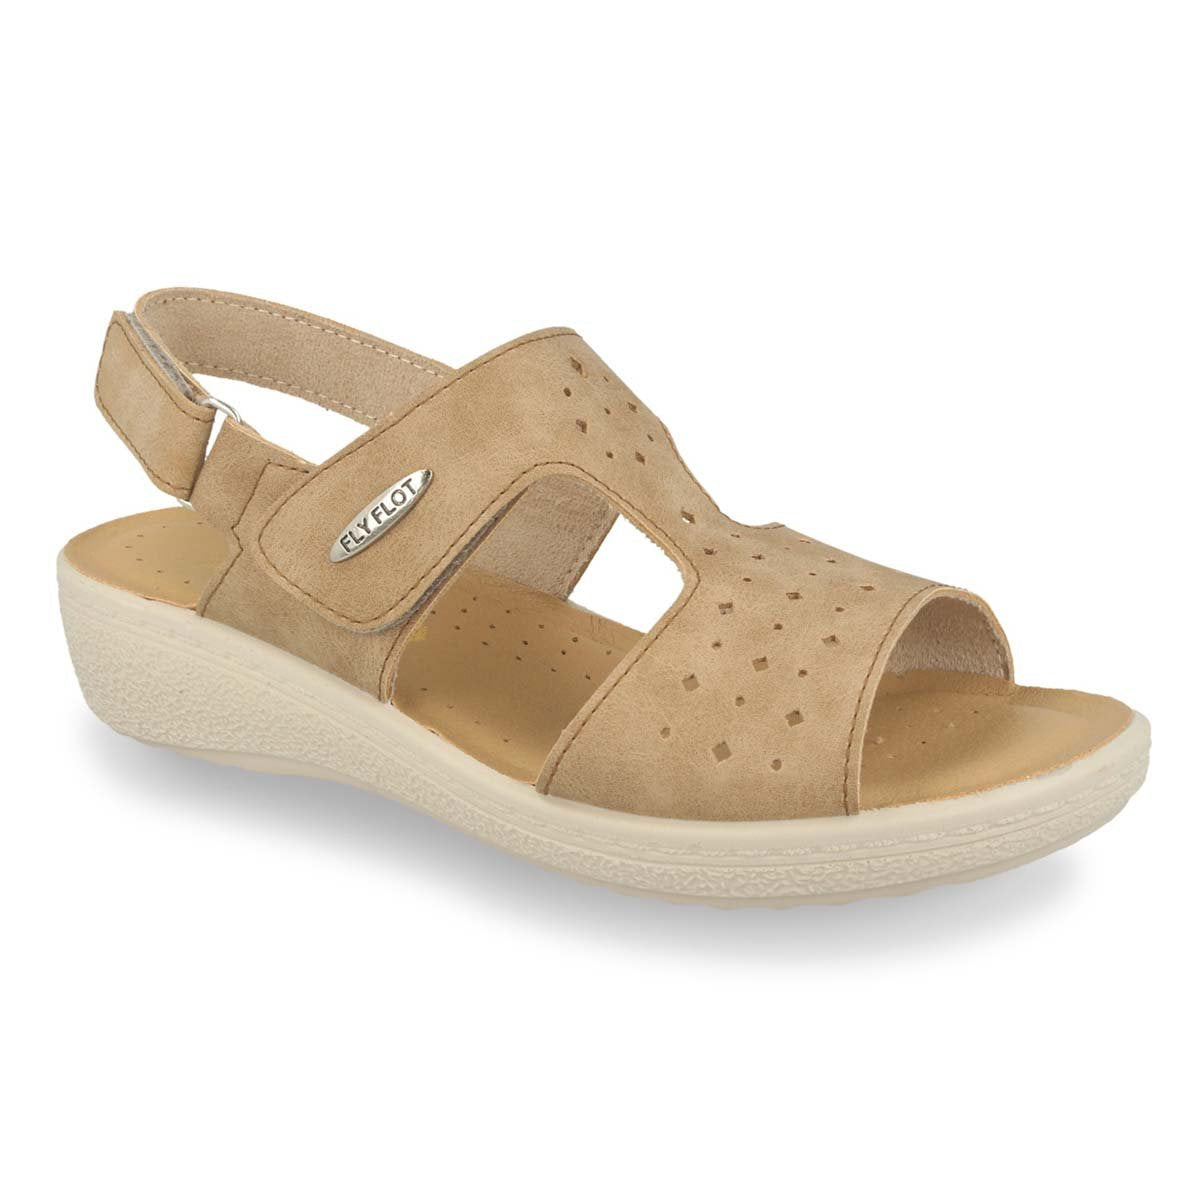 Photo of the Synthetic Woman Sandal Beige (55d69cb)